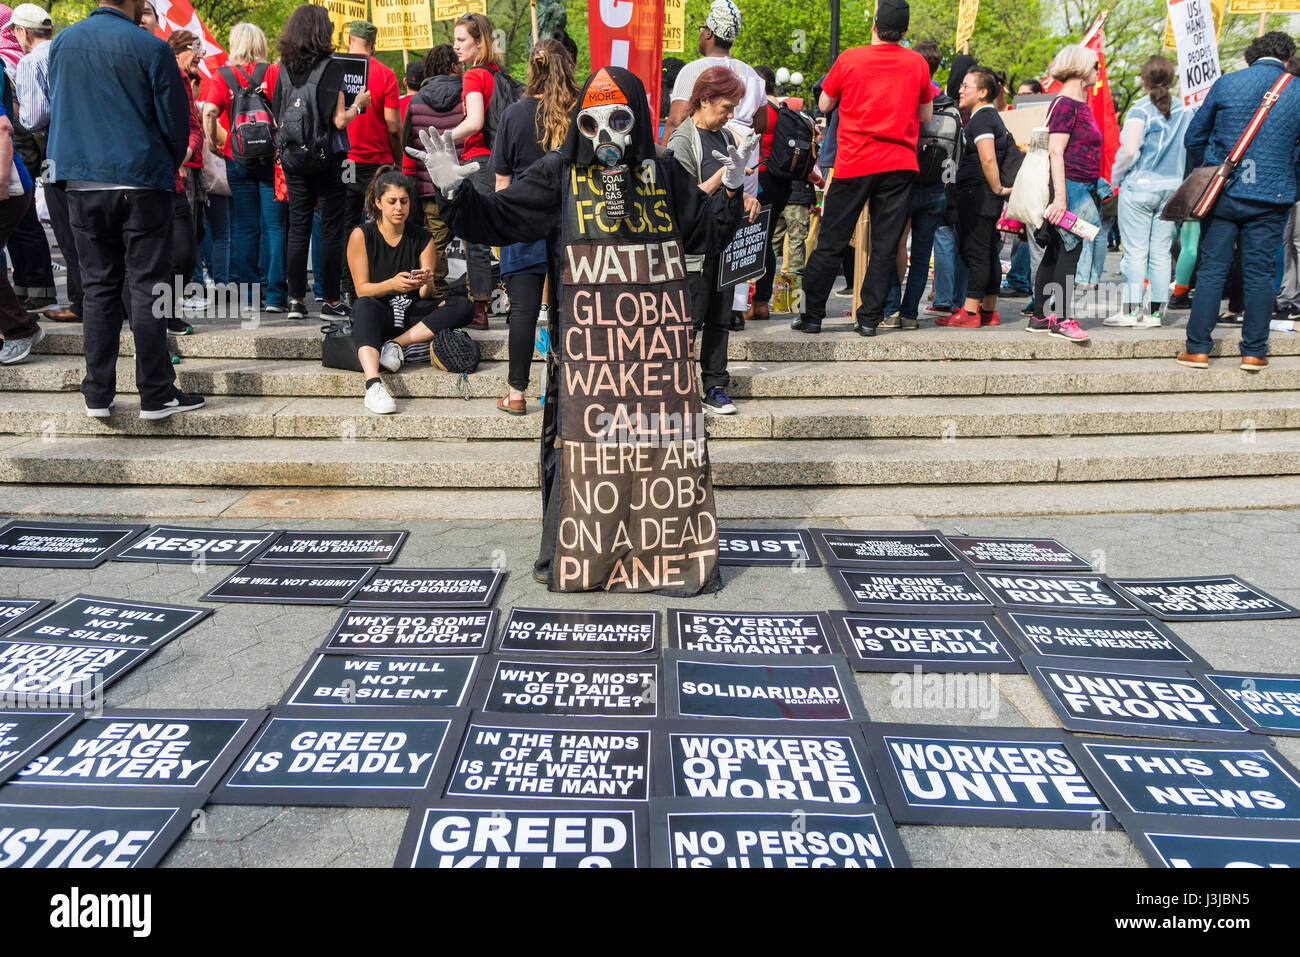 New York, NY 1 May 2017 - A Toxic Harbinger of Death, the Grim reaper, overlooks various demands and socialist issues at a May Day rally for International Workers Day in Union Square Park. ©Stacy Walsh Rosenstock/Alamy Stock Photo